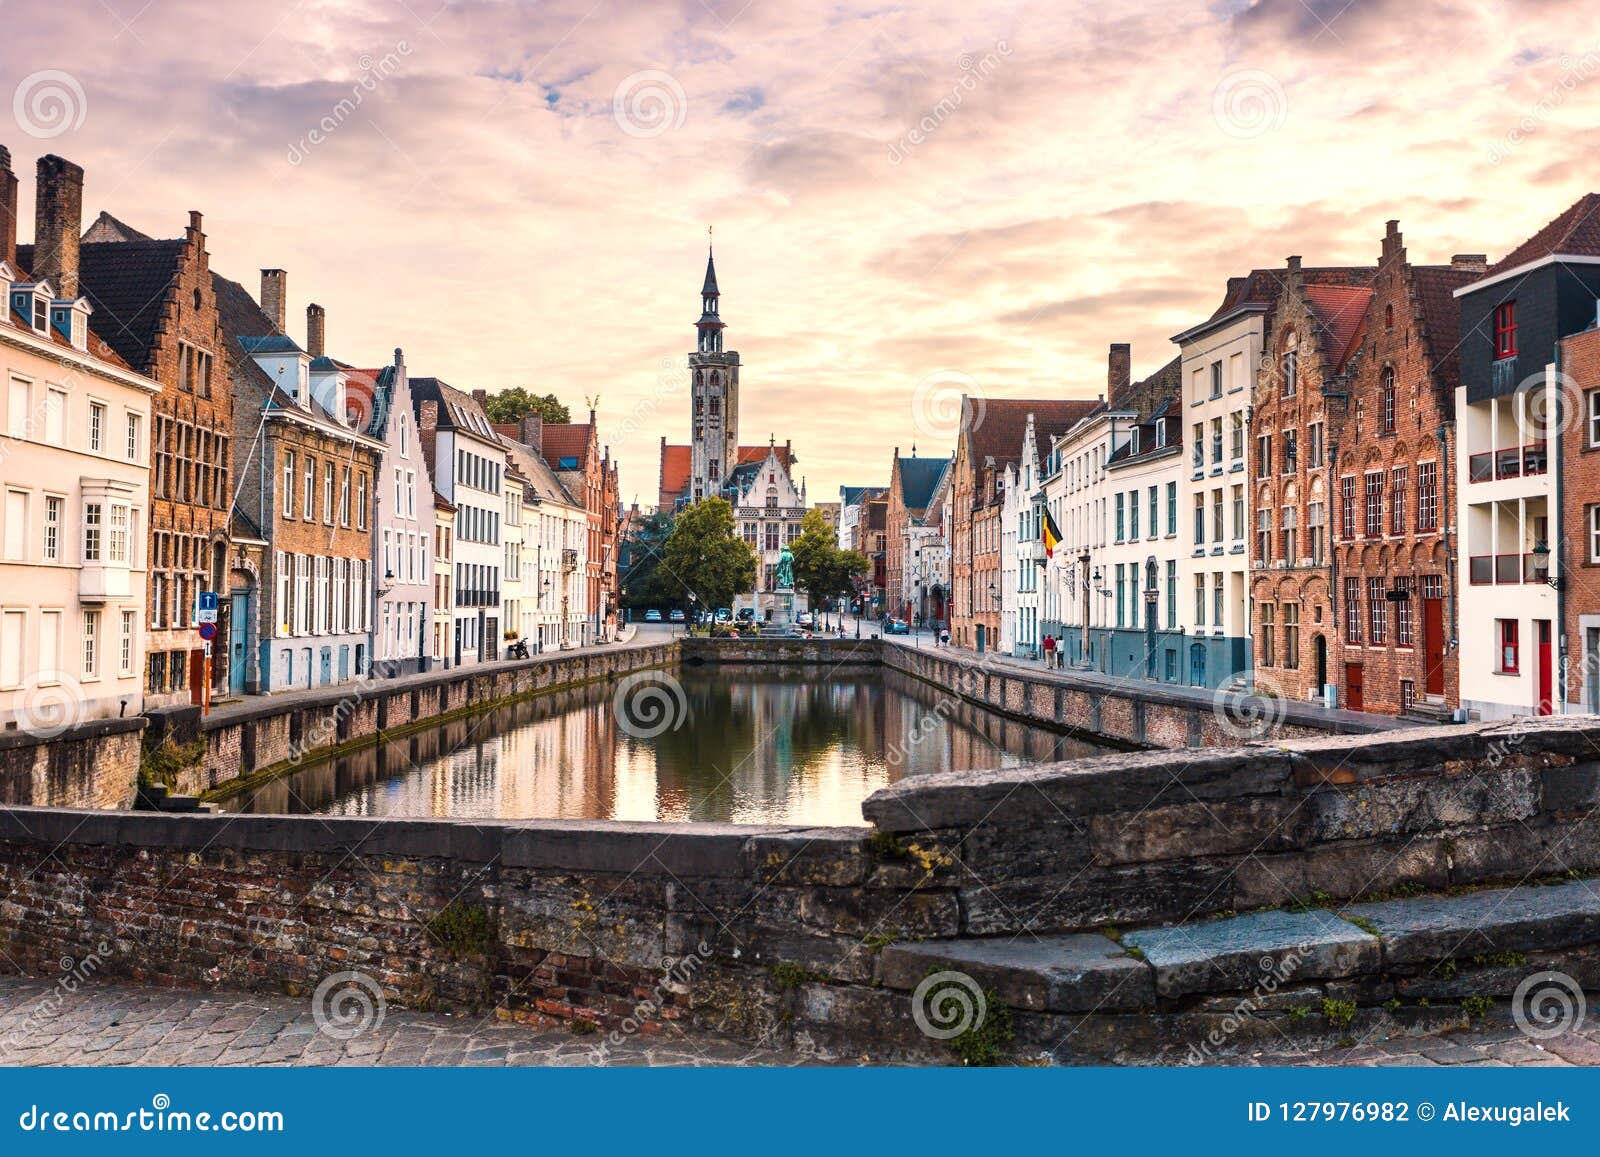 bruges cityscape. old brugge town famous destination in europe.